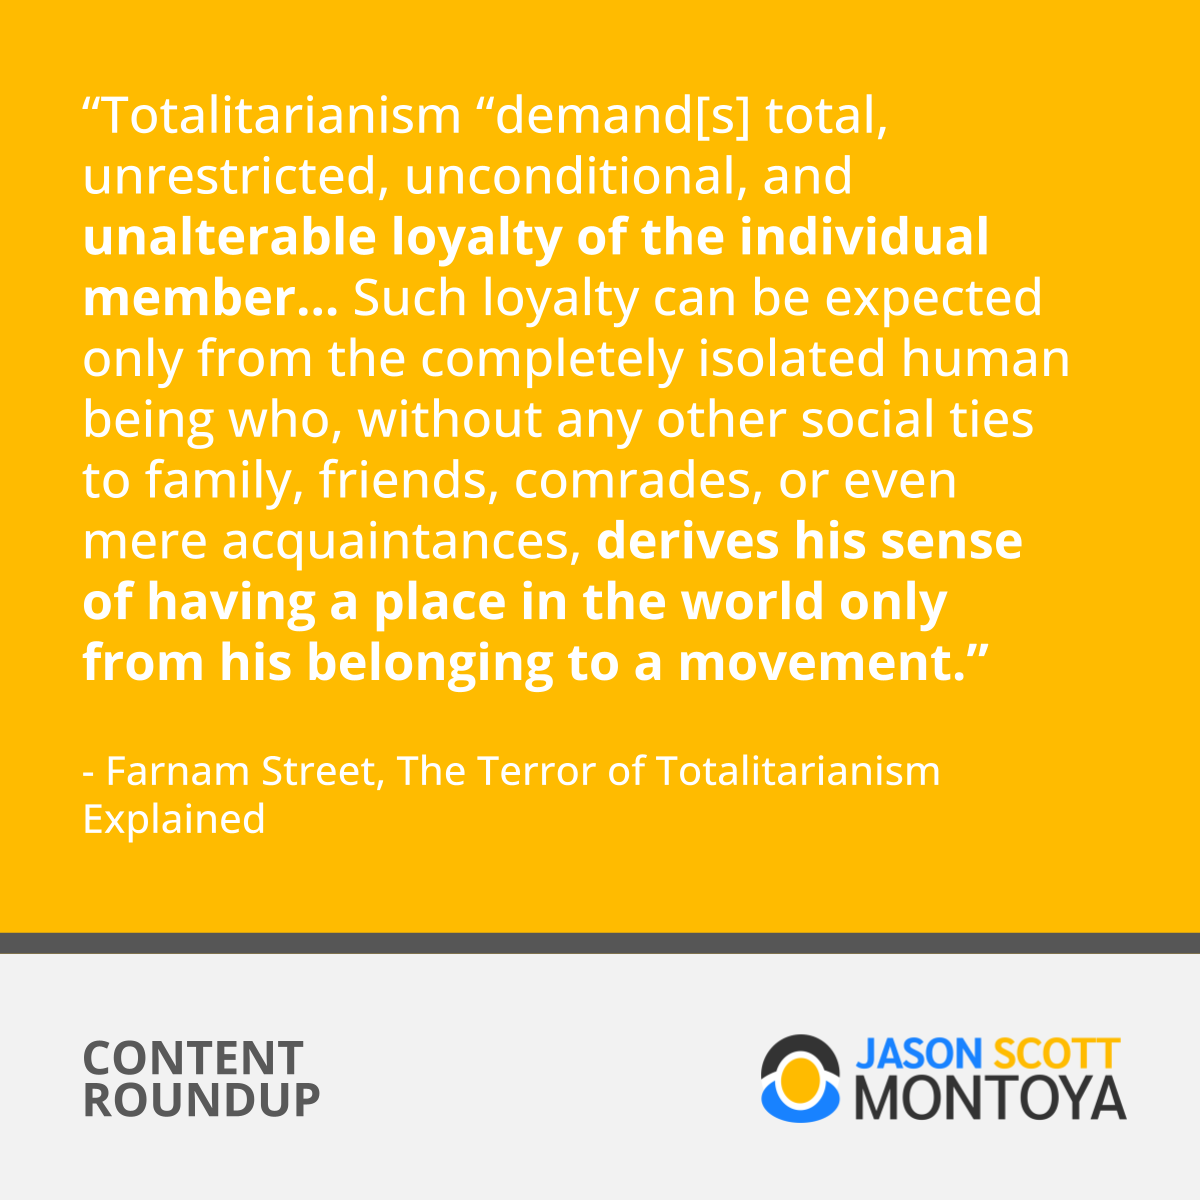 “Totalitarianism “demand[s] total, unrestricted, unconditional, and unalterable loyalty of the individual member… Such loyalty can be expected only from the completely isolated human being who, without any other social ties to family, friends, comrades, or even mere acquaintances, derives his sense of having a place in the world only from his belonging to a movement.”  - Farnam Street, The Terror of Totalitarianism Explained